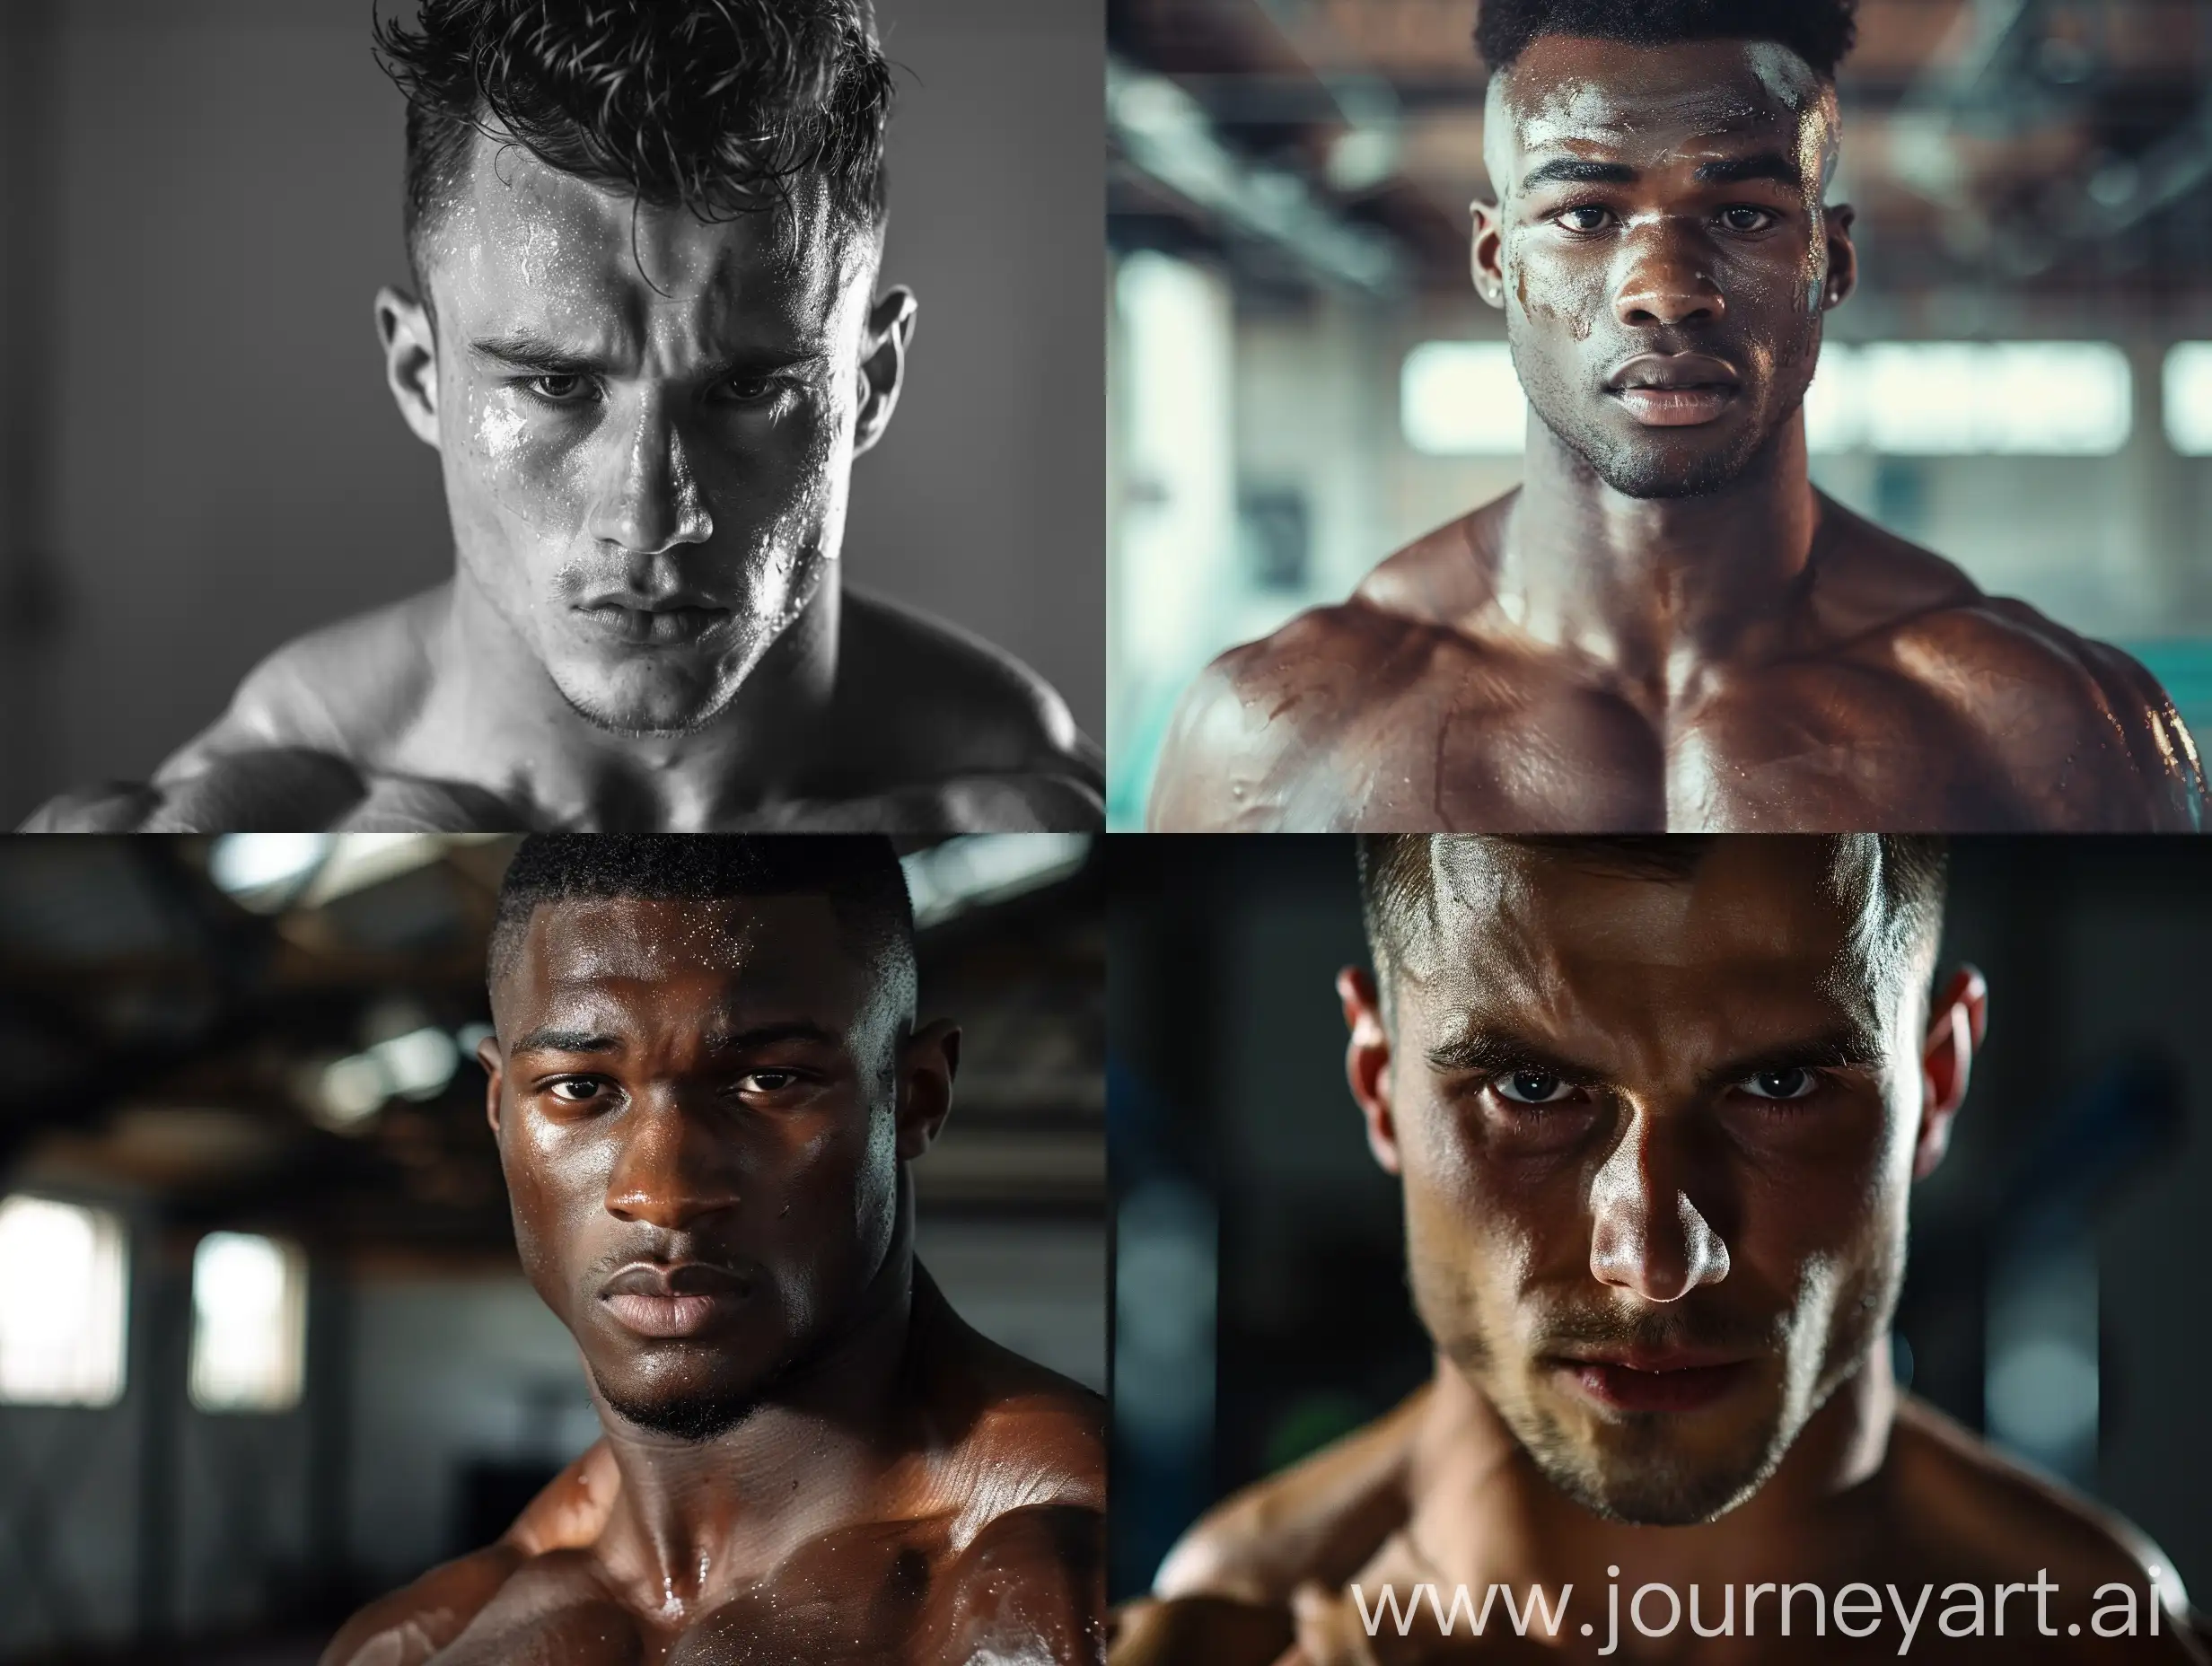 Confident-Muscular-Athlete-Gazing-Intensely-Fitness-Portrait